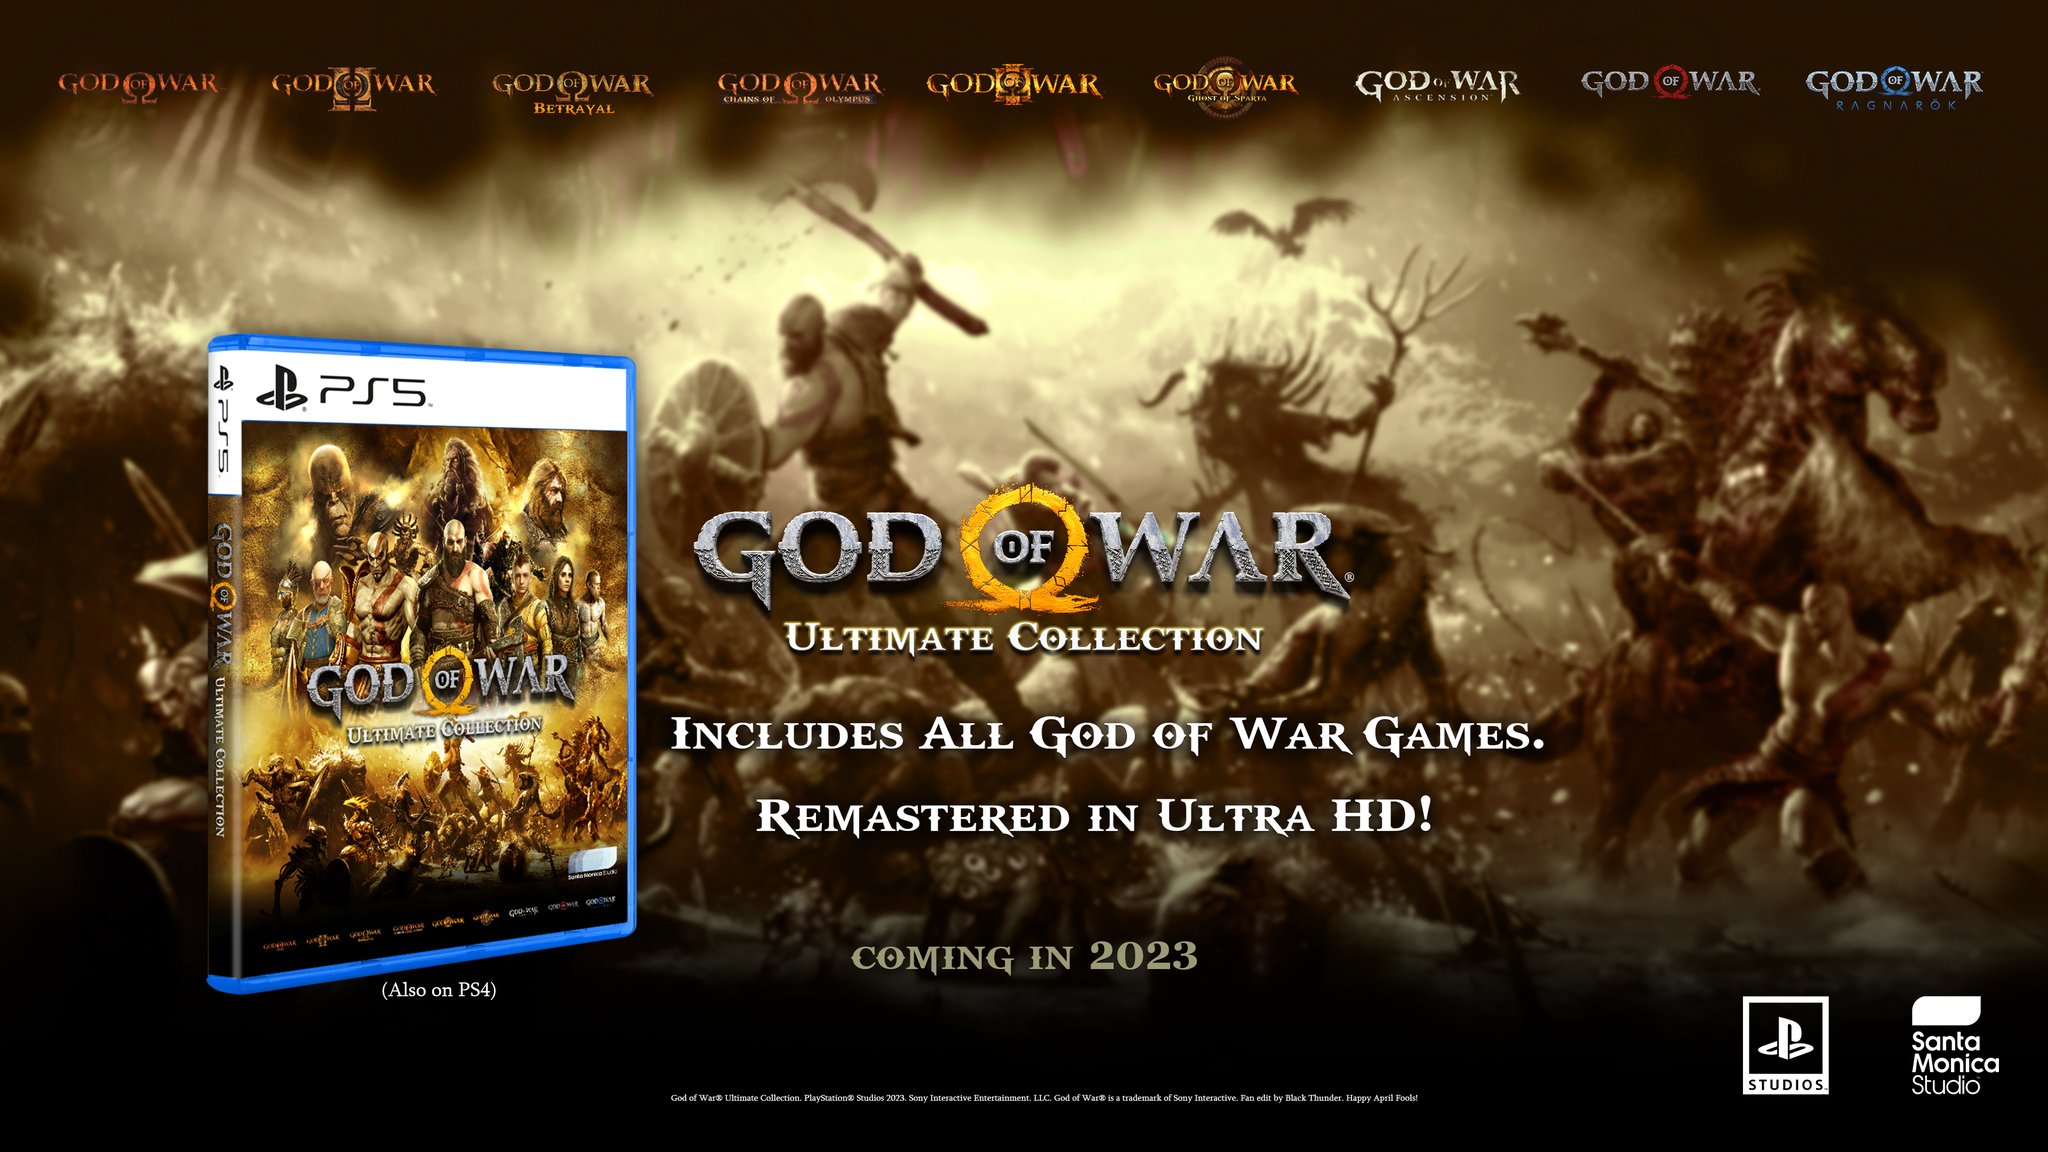 Black Thunder ⚡️ on Twitter: "Here's what you've all been waiting for! #GodofWar Ultimate A with ALL God of games remastered in 4k! Coming to PS4 and PS4 in